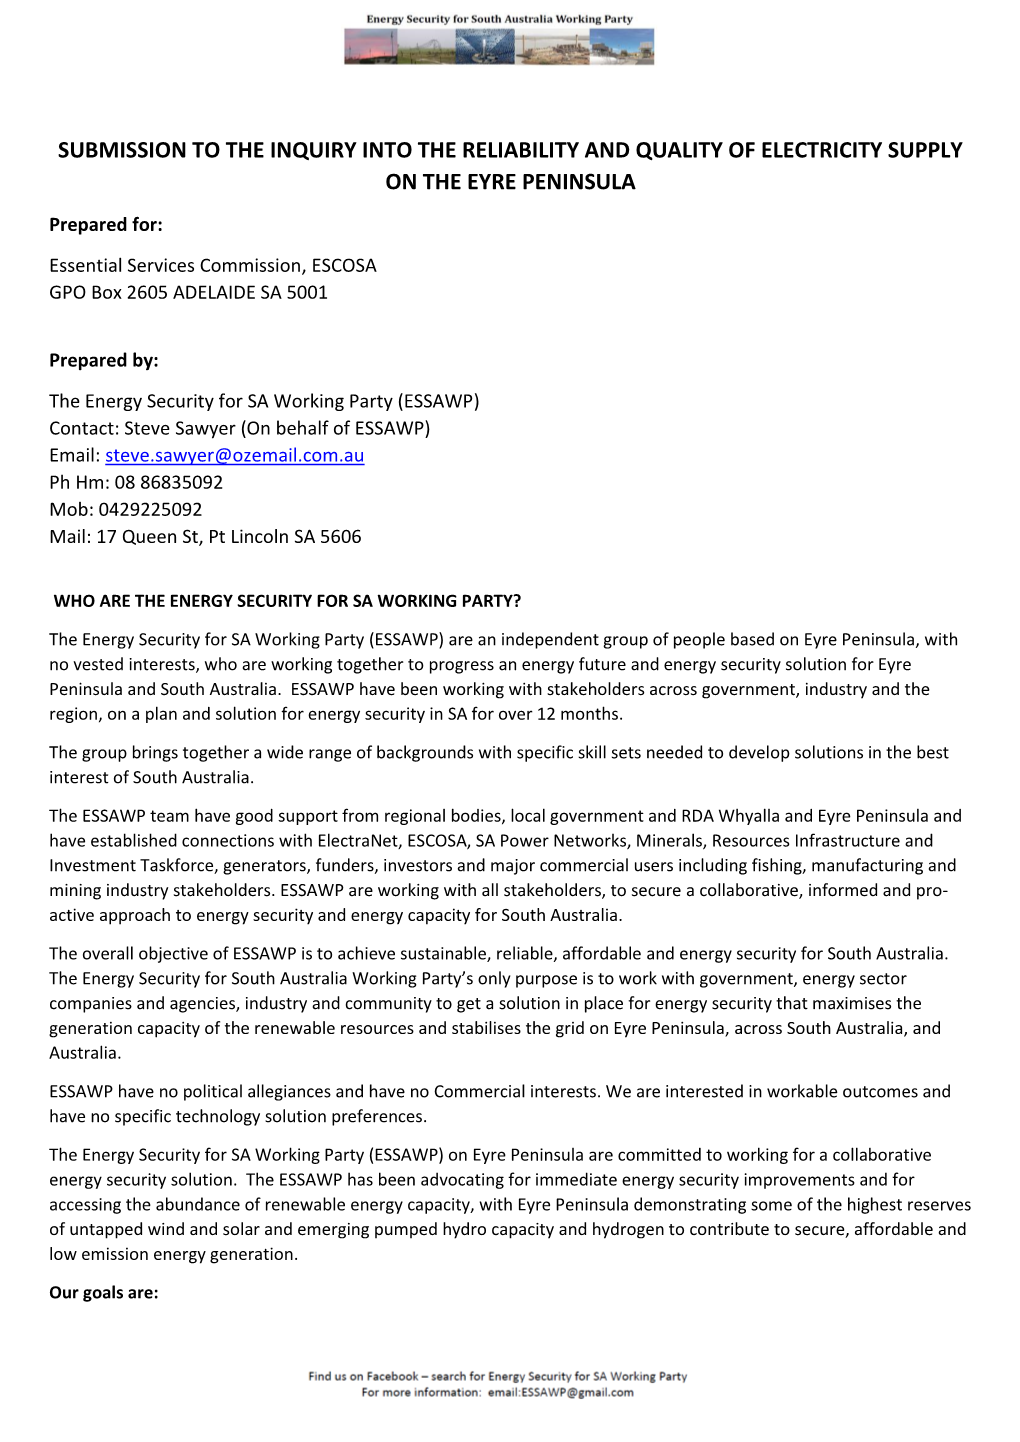 Submission to the Inquiry Into the Reliability and Quality of Electricity Supply on the Eyre Peninsula